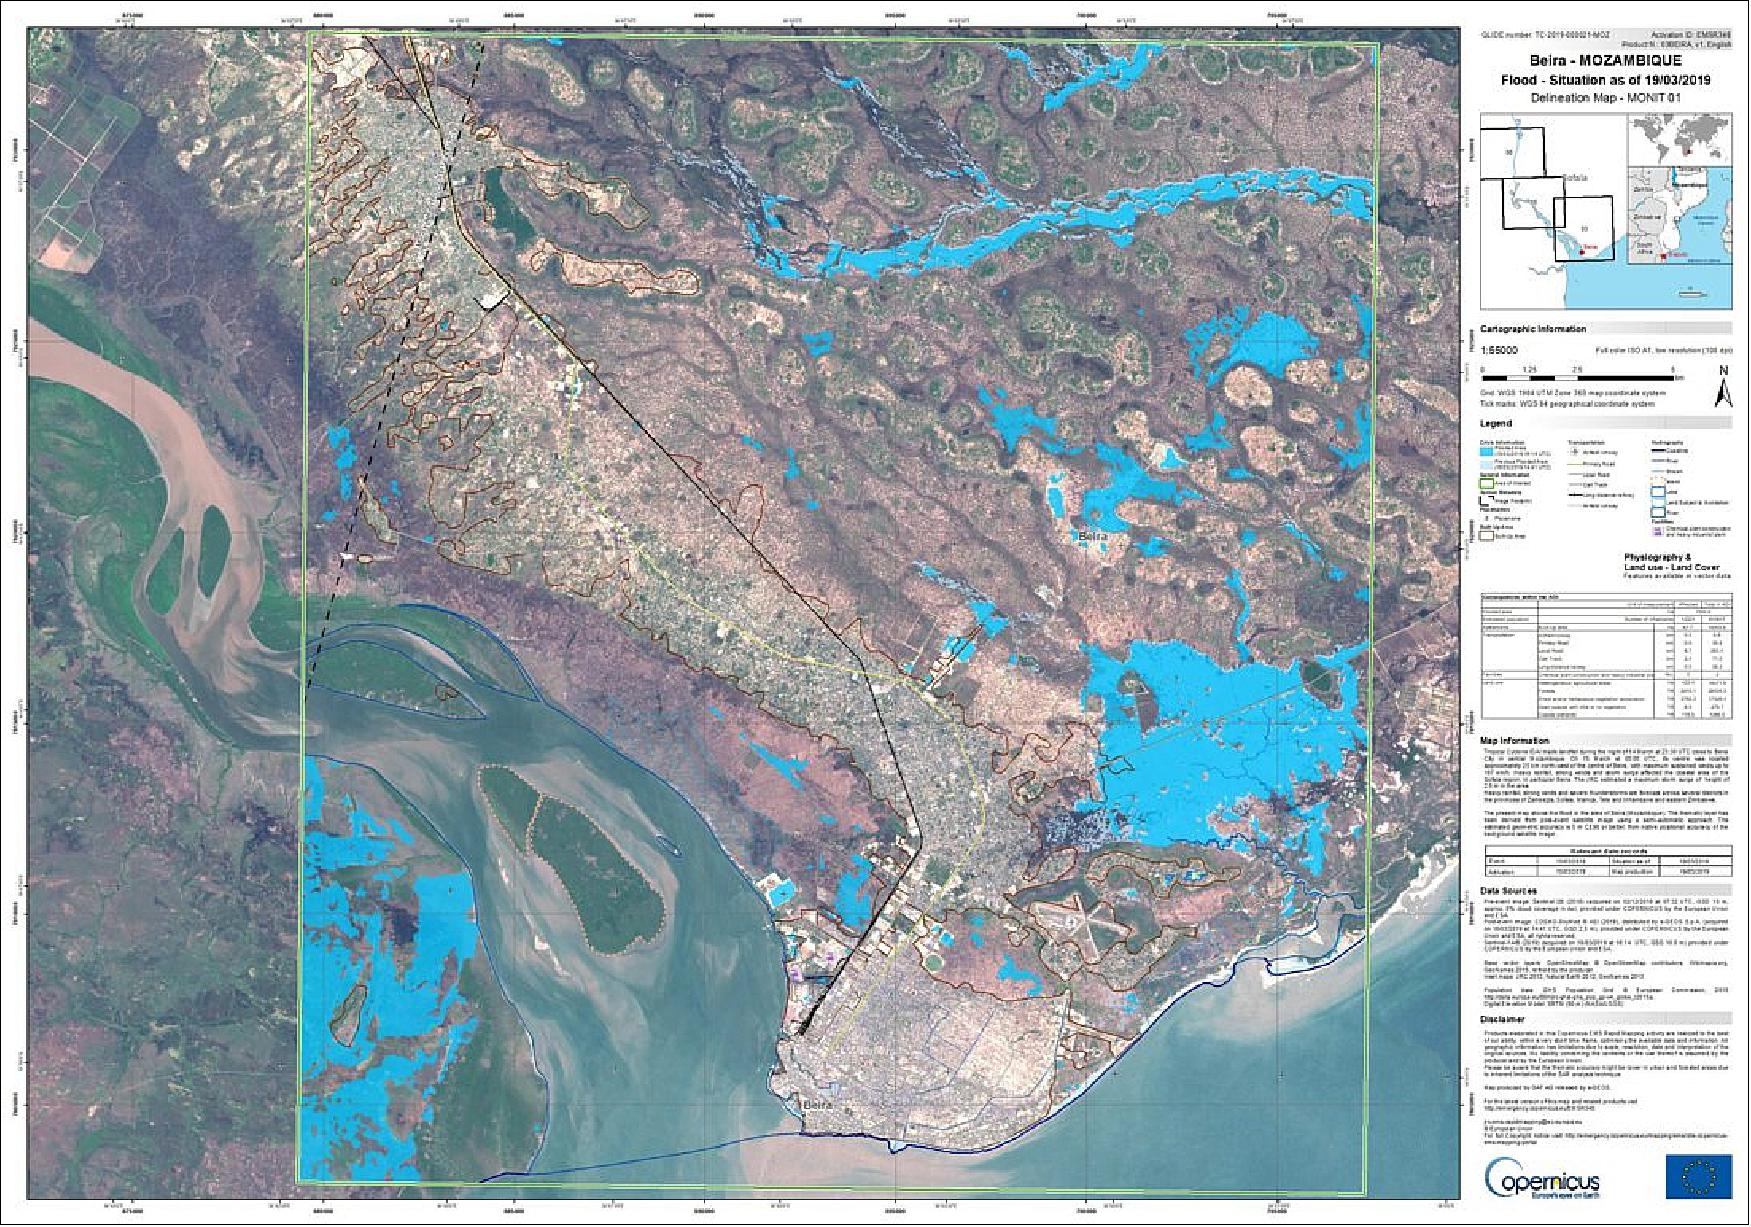 Figure 27: Tropical Cyclone Idai made landfall on 14 March 2019 close to the port city of Beira in Mozambique. This map, which was generated through the Copernicus Emergency Management Service, uses information from the EC’s Copernicus Sentinel-1 mission on 19 March (bright blue), and Italy’s Cosmo-SkyMed satellite on 16 March (light blue) to map the floods to aid relief efforts. More maps of floods caused by Cyclone Idai are available at the Copernicus Emergency Management Service website (image credit: ESA, the image contains modified Copernicus Sentinel data (2019), Cosmo-SkyMed, processed by GAF AG/e-GEOS/CMEMS)